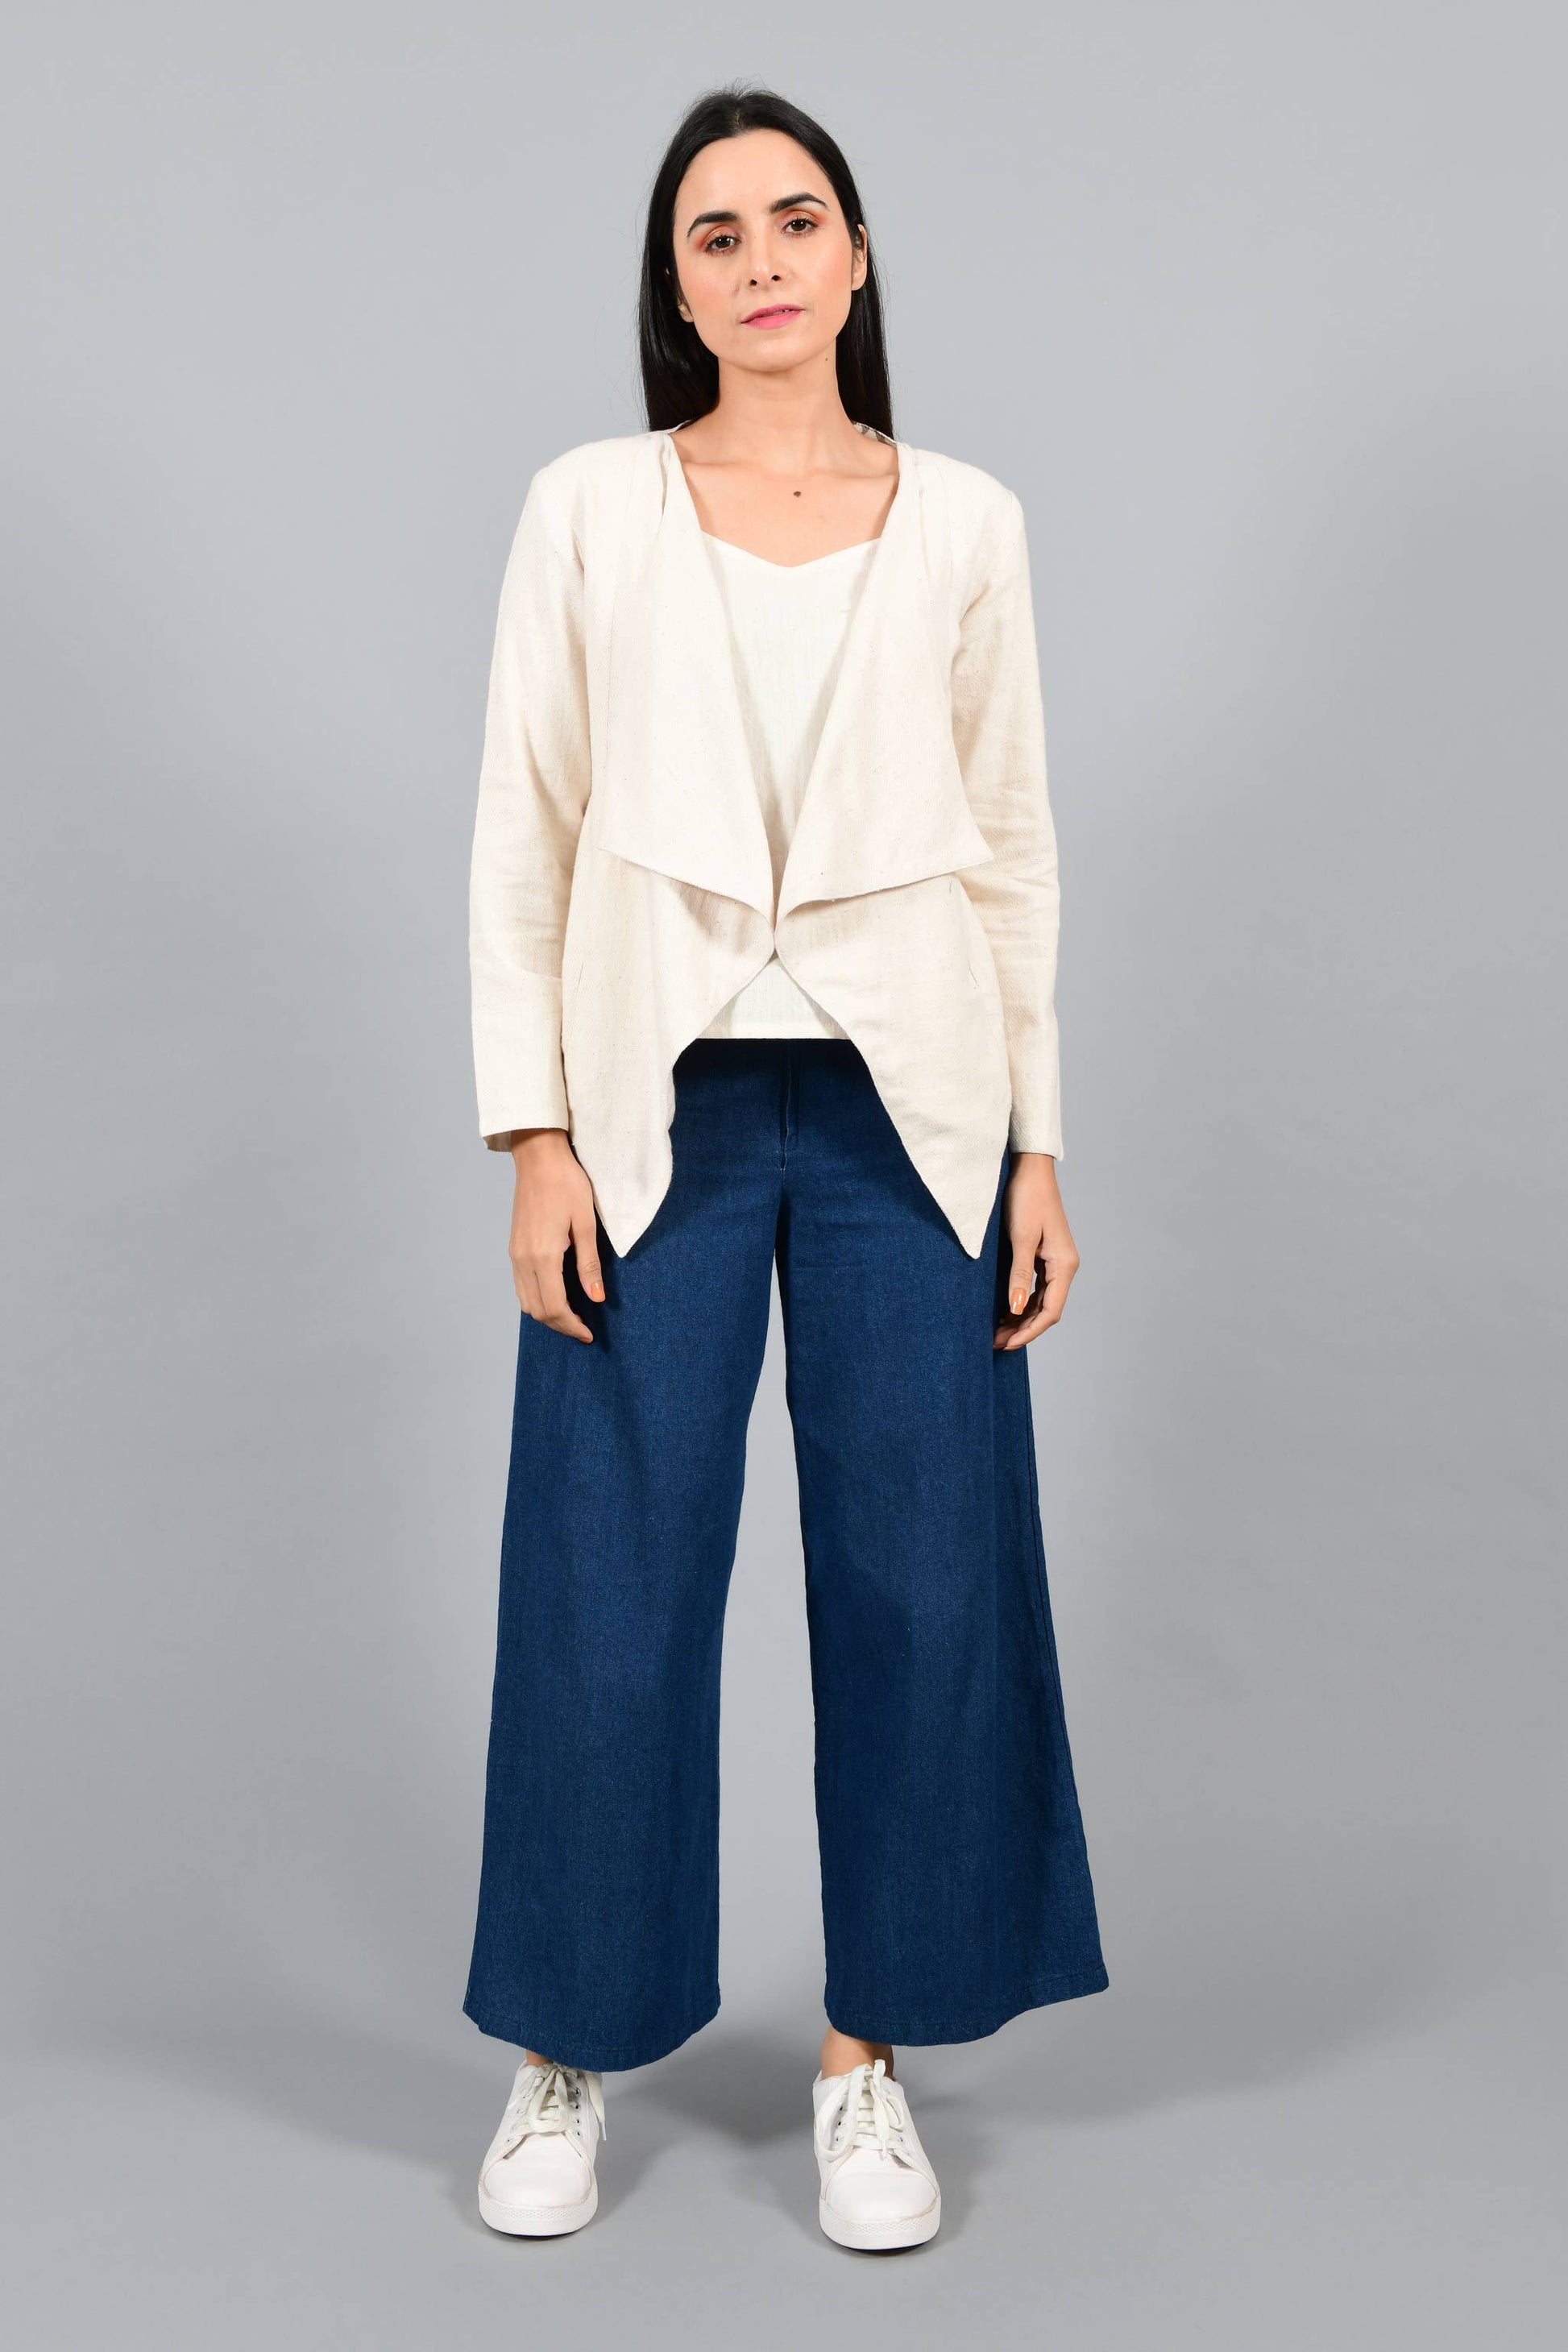 Front pose of an Indian female womenswear fashion model in a short off-white Cashmere Cotton jacket-shrug with extra wide lapels, made using handspun and handwoven khadi cotton by Cotton Rack.